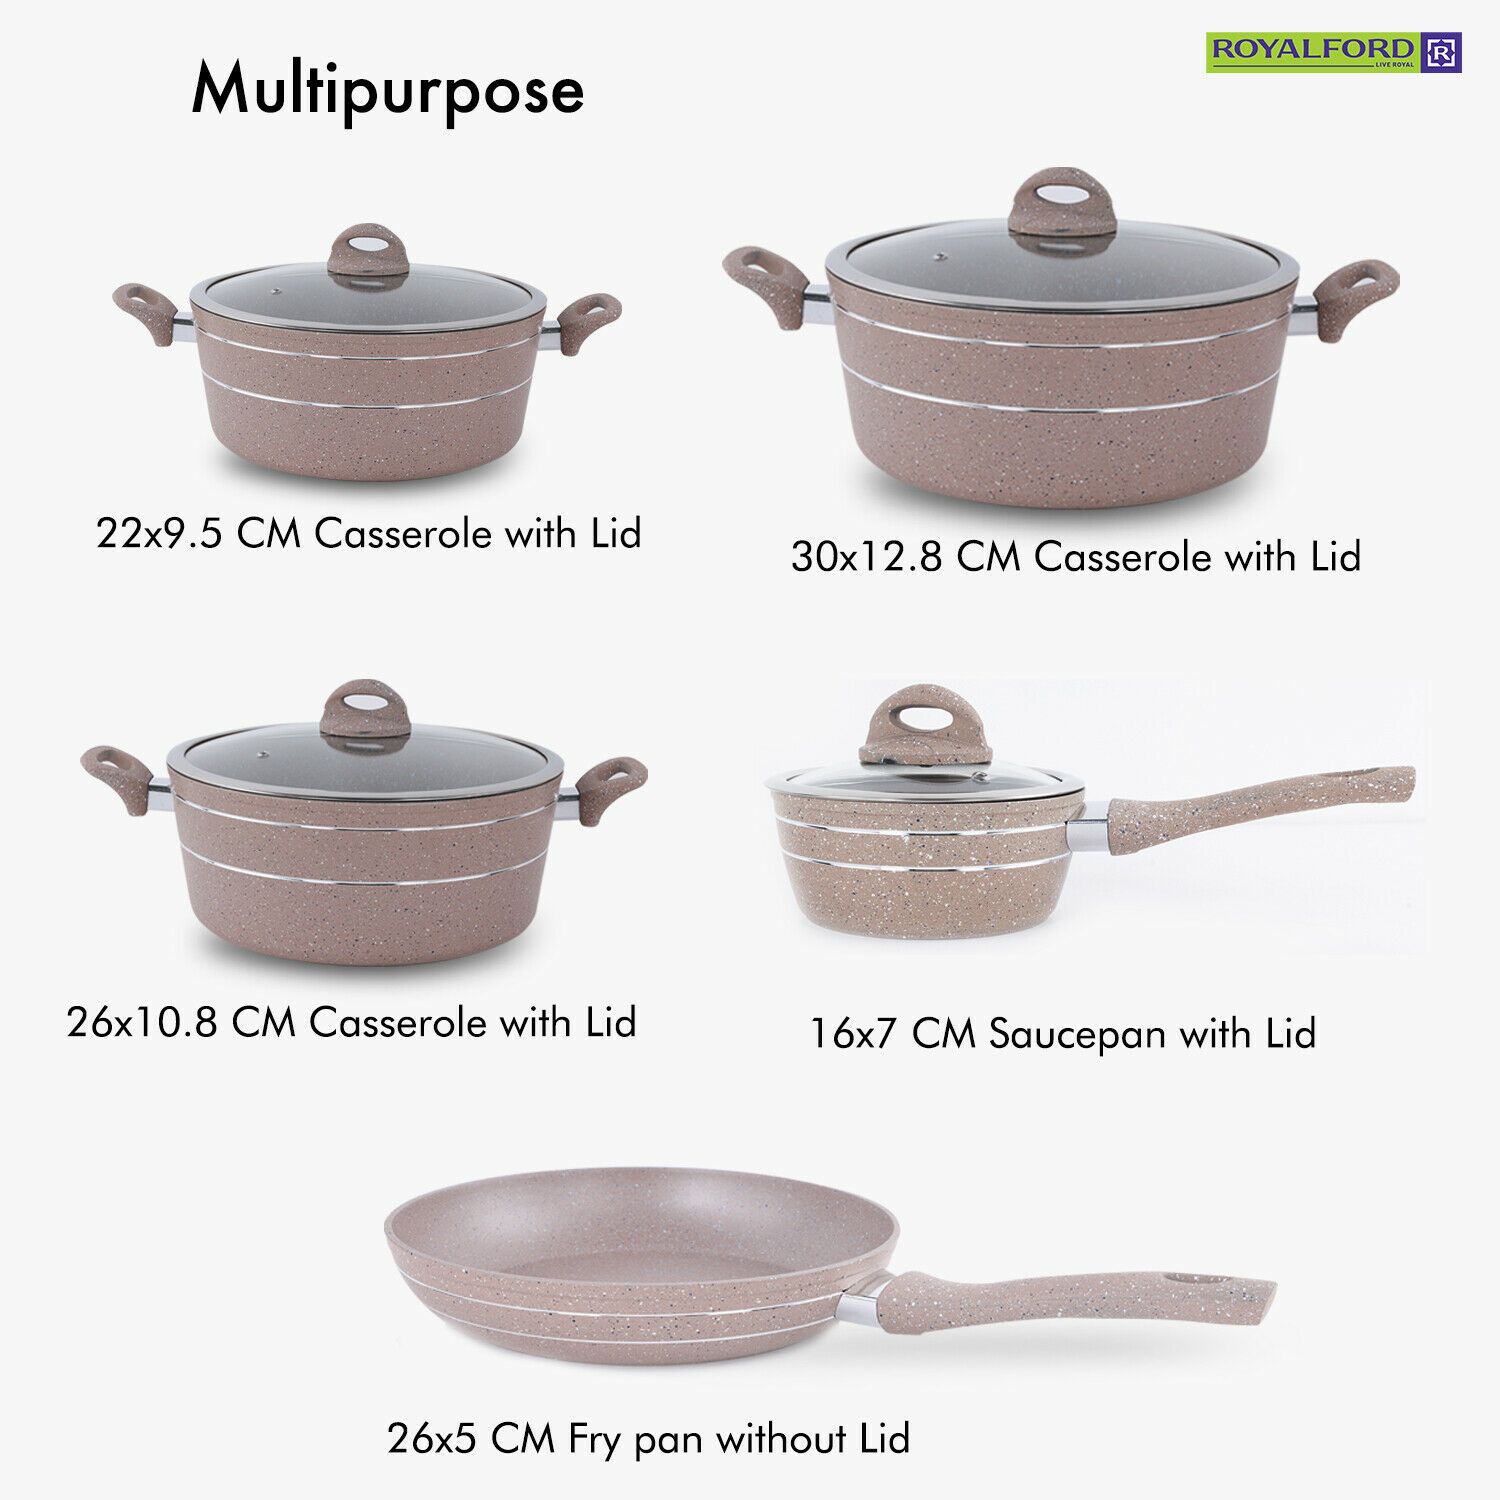 Five Piece Forged Aluminium Cookware Set Cookware Sets Royalford 